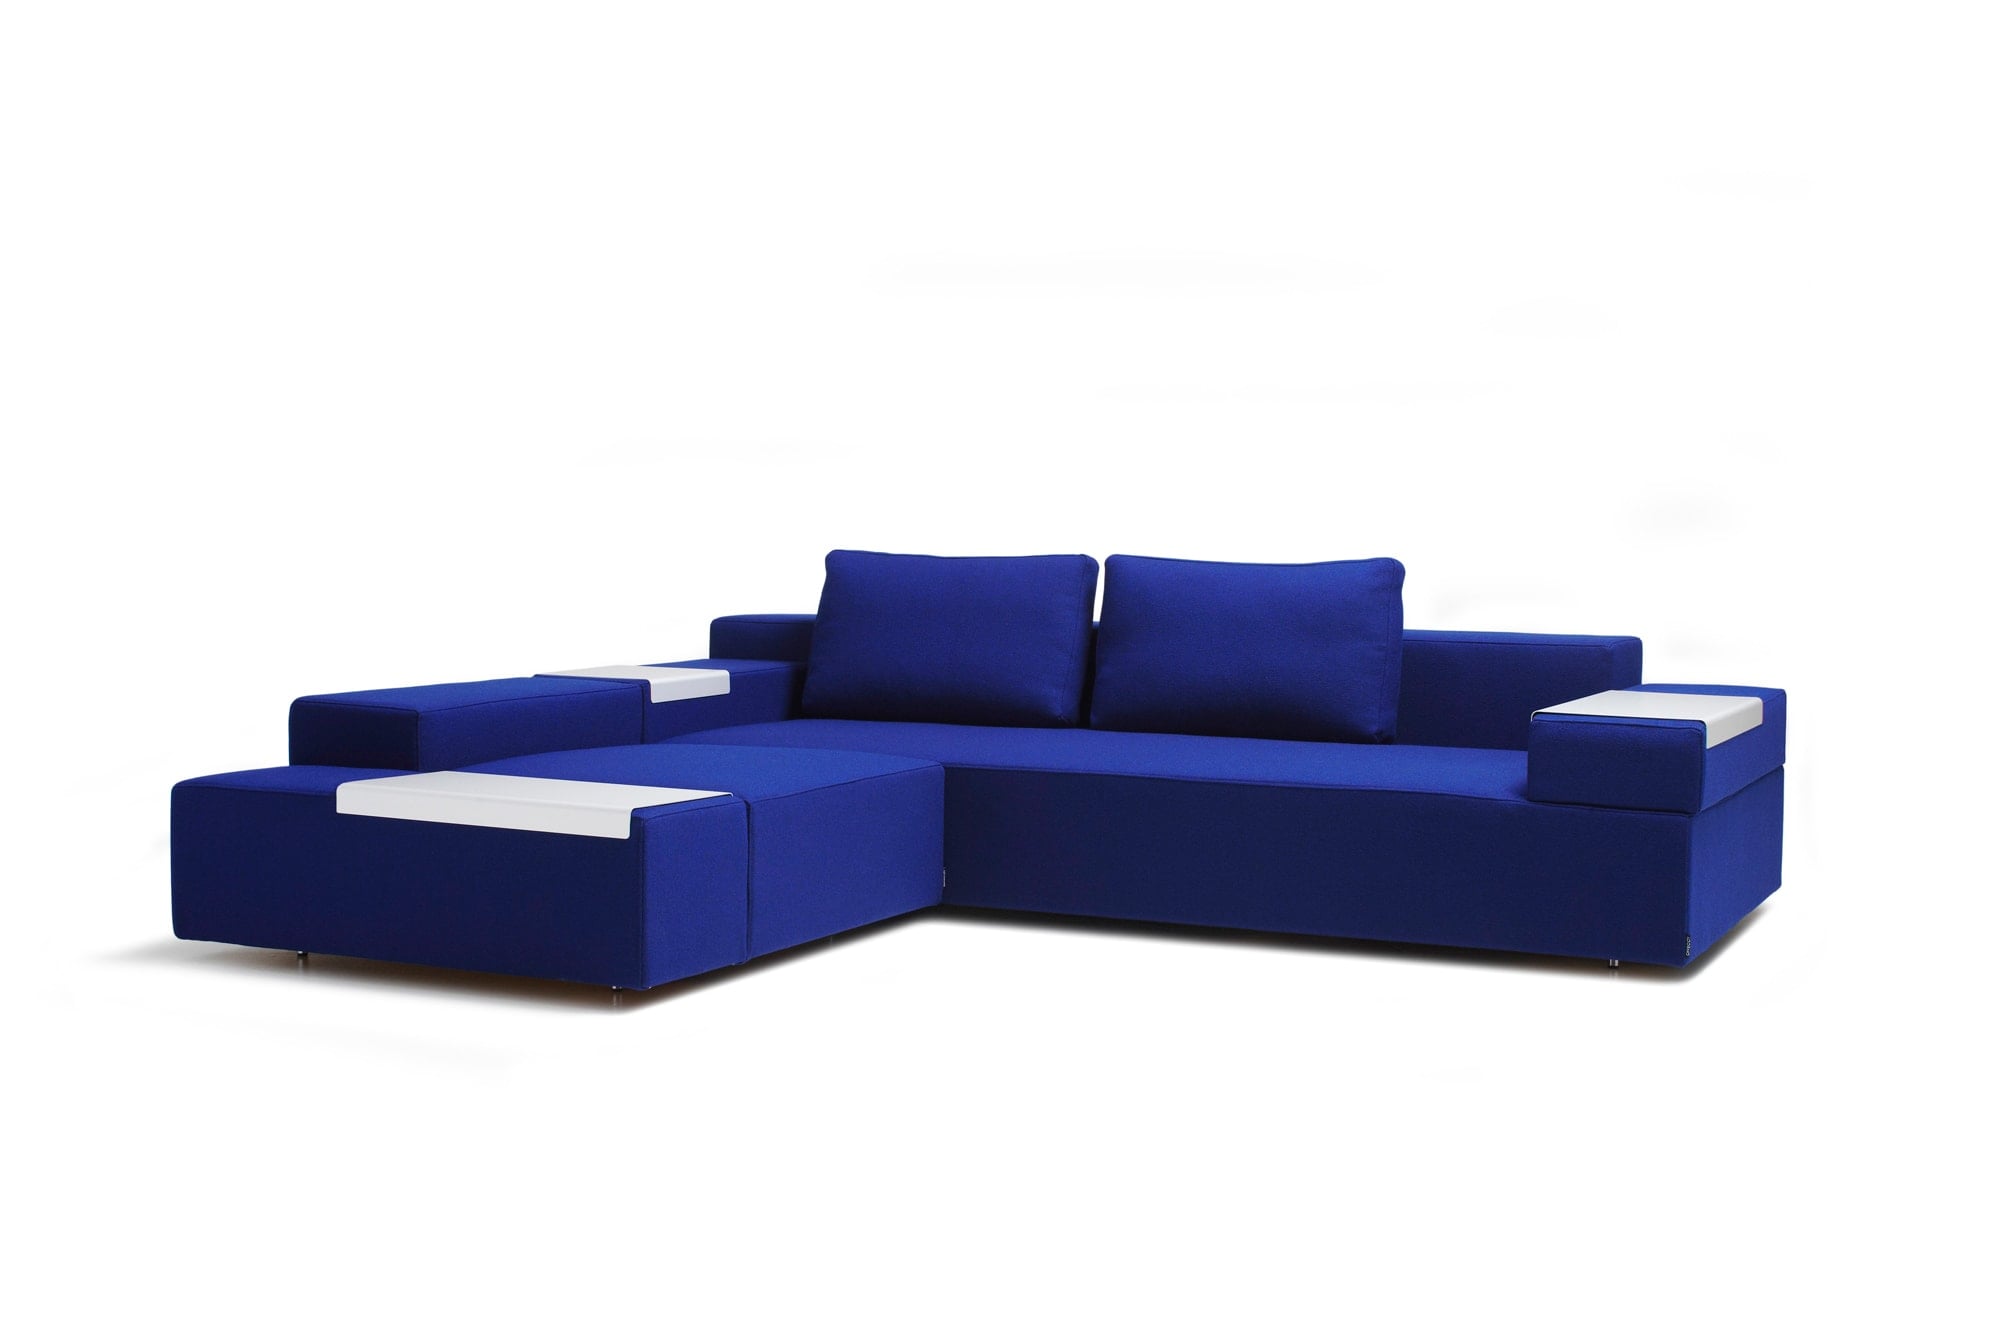 The sofa which Yanagihara designed for the Swedish Furniture Manufacturer, OFFECCT.